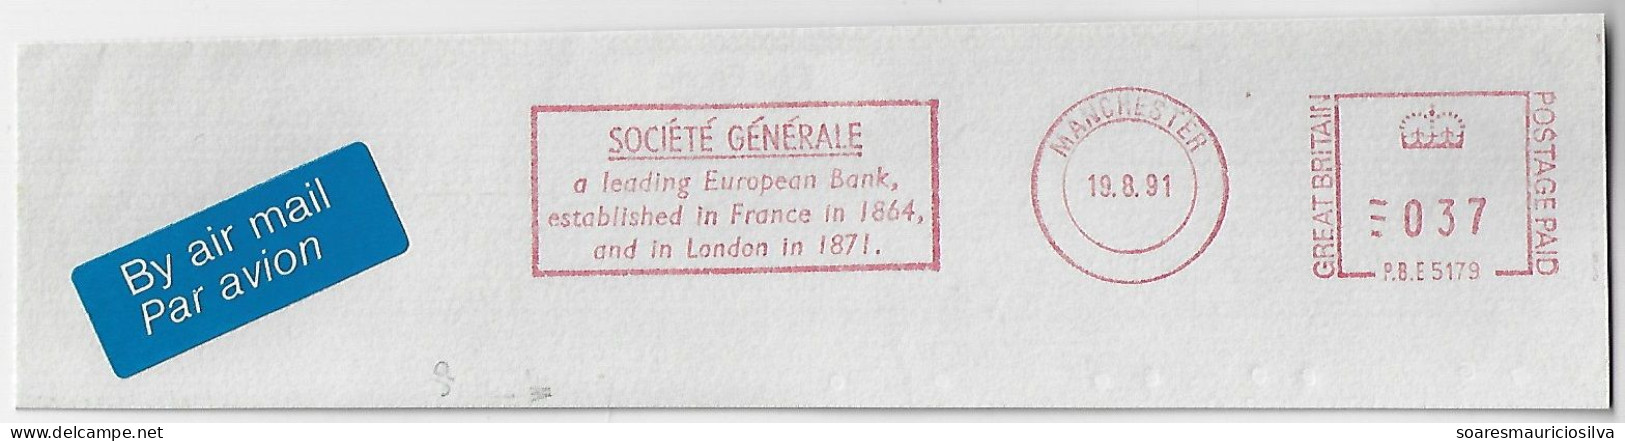 Great Britain 1991 Meter Stamp Pitney Bowes 5000 Series With Slogan By Société Générale Bank In Manchester - Lettres & Documents